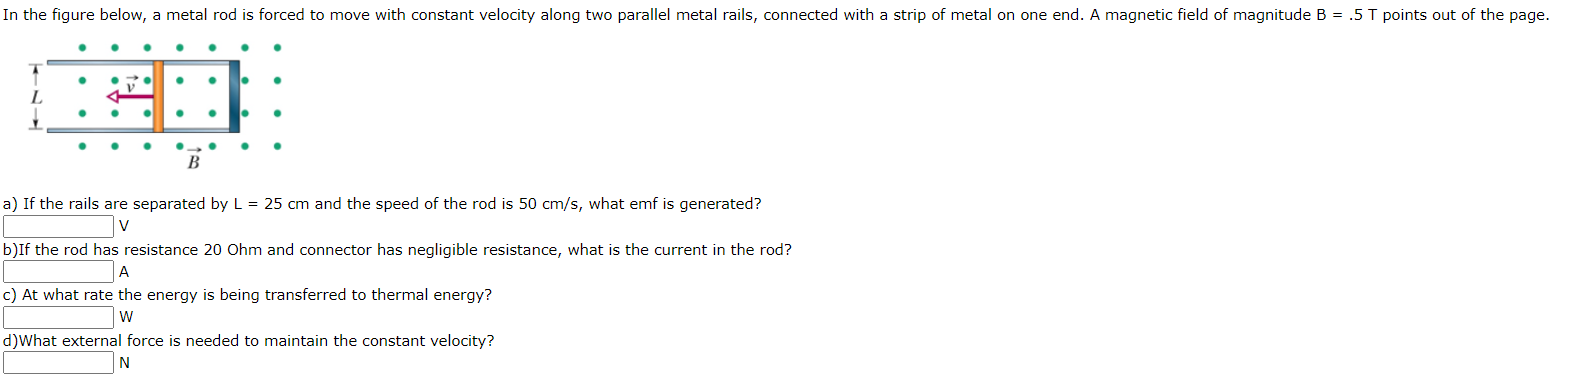 In the figure below, a metal rod is forced to move with constant velocity along two parallel metal rails, connected with a strip of metal on one end. A magnetic field of magnitude B = .5 T points out of the page.
L
B
a) If the rails are separated by L = 25 cm and the speed of the rod is 50 cm/s, what emf is generated?
b)If the rod has resistance 20 Ohm and connector has negligible resistance, what is the current in the rod?
A
c) At what rate the energy is being transferred to thermal energy?
d)What external force is needed to maintain the constant velocity?
